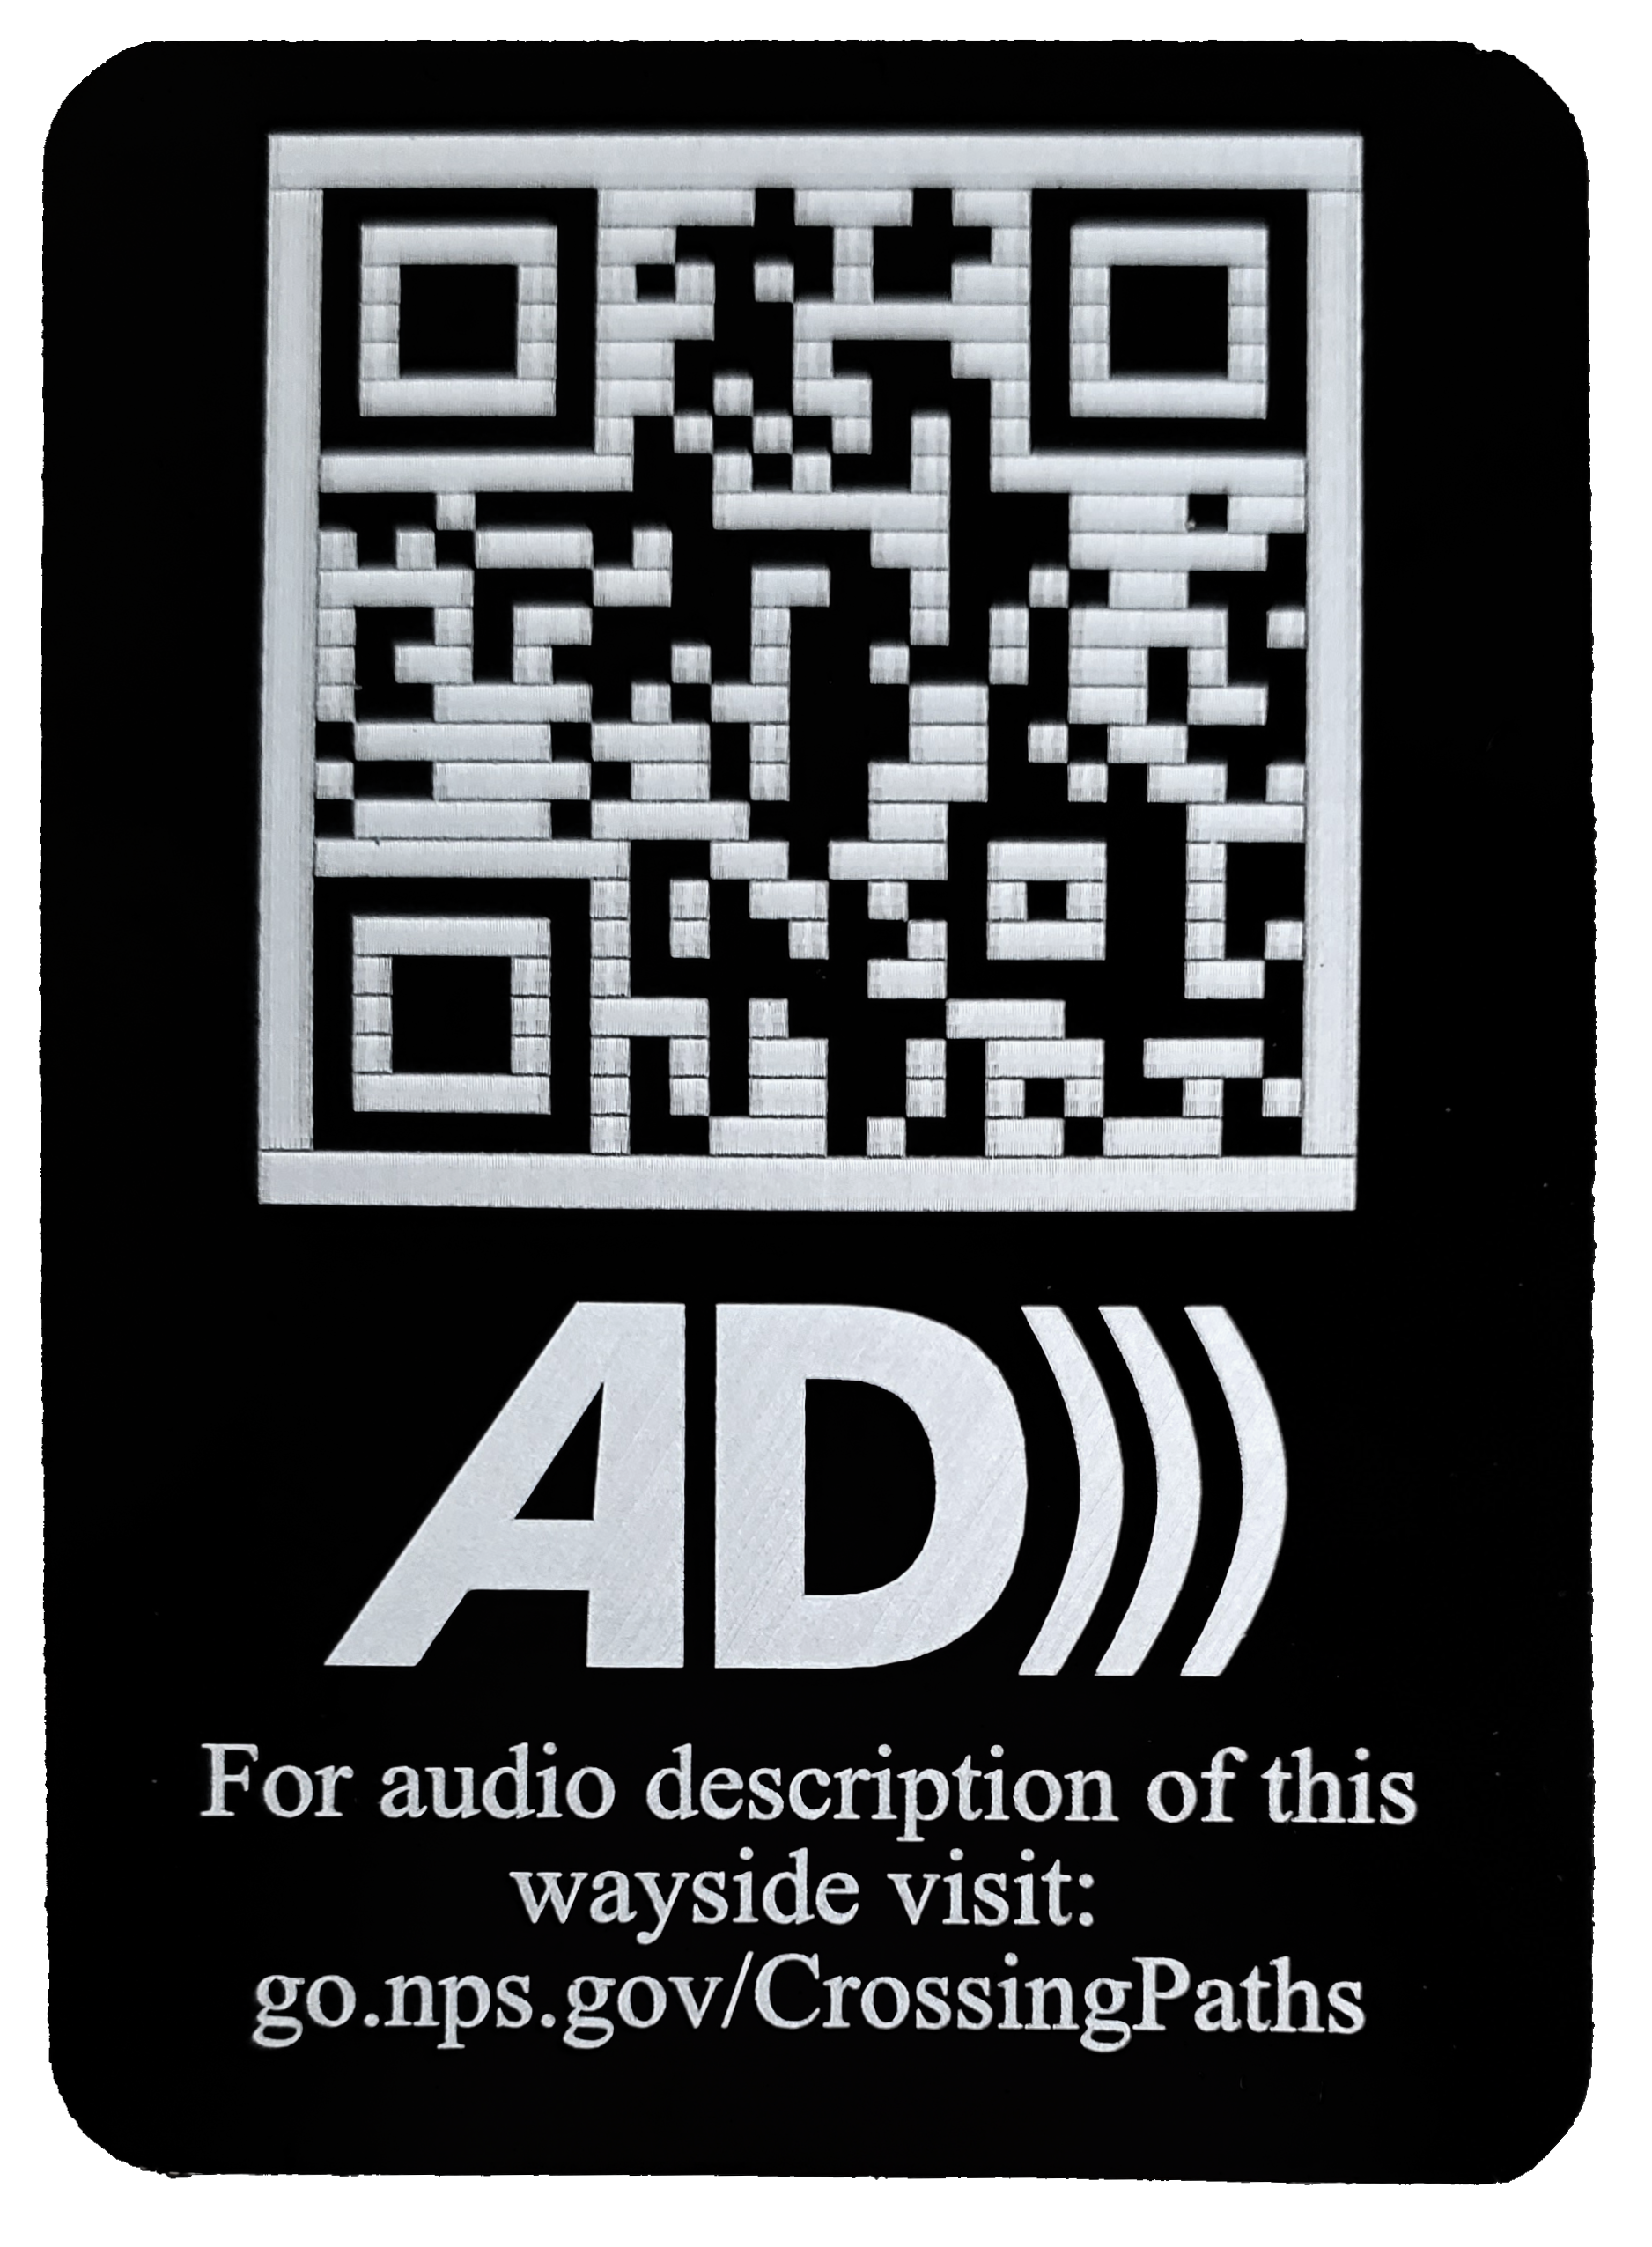 A black block with Audio Description image and text.